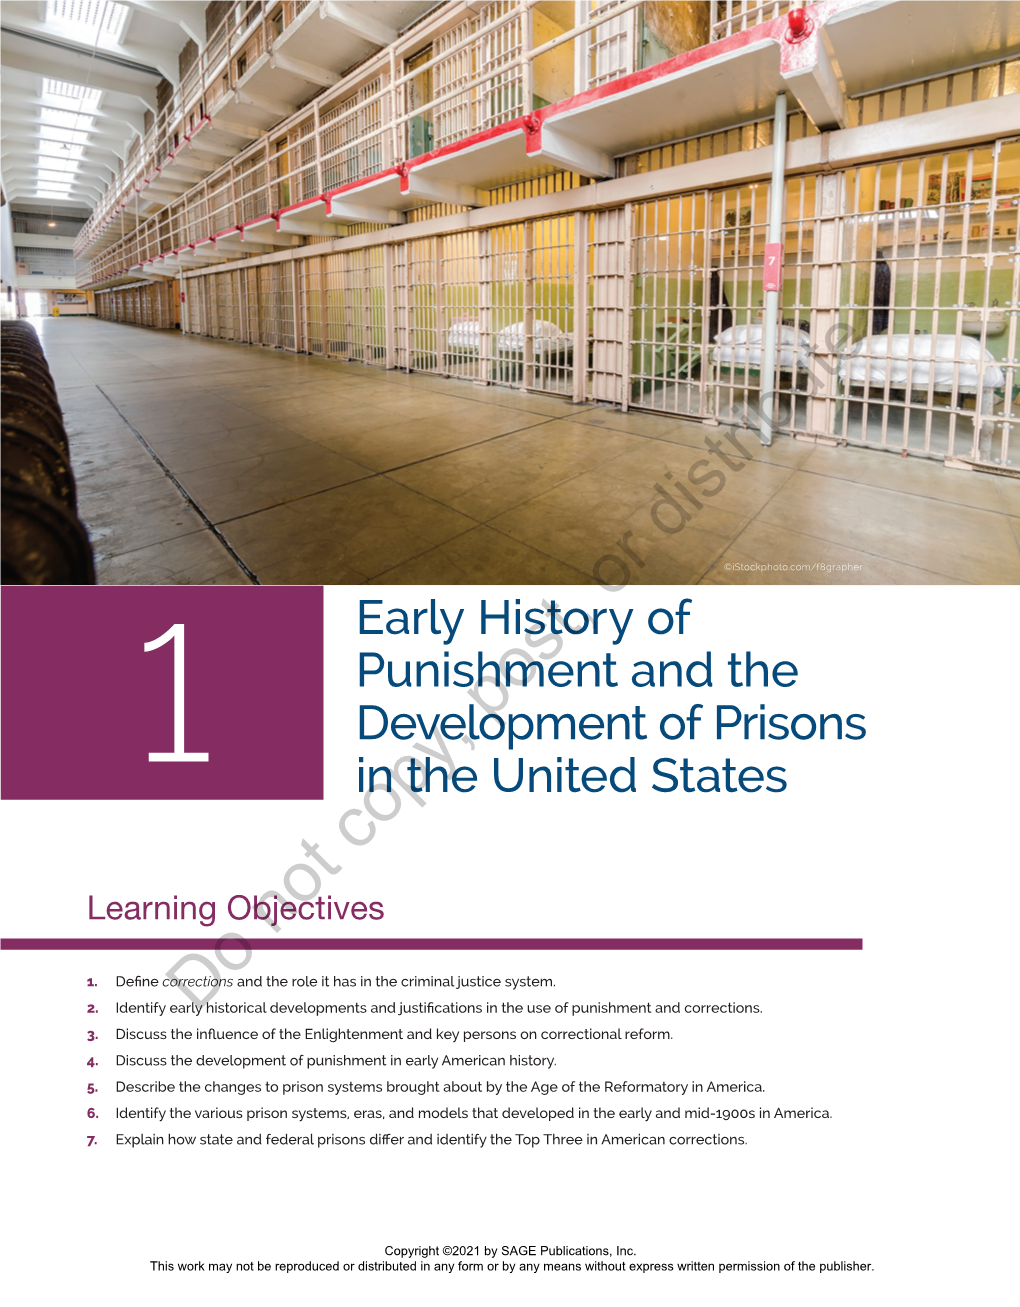 Early History of Punishment and the Development of Prisons in the United States 1 Prisoner Number One at Eastern Penitentiary